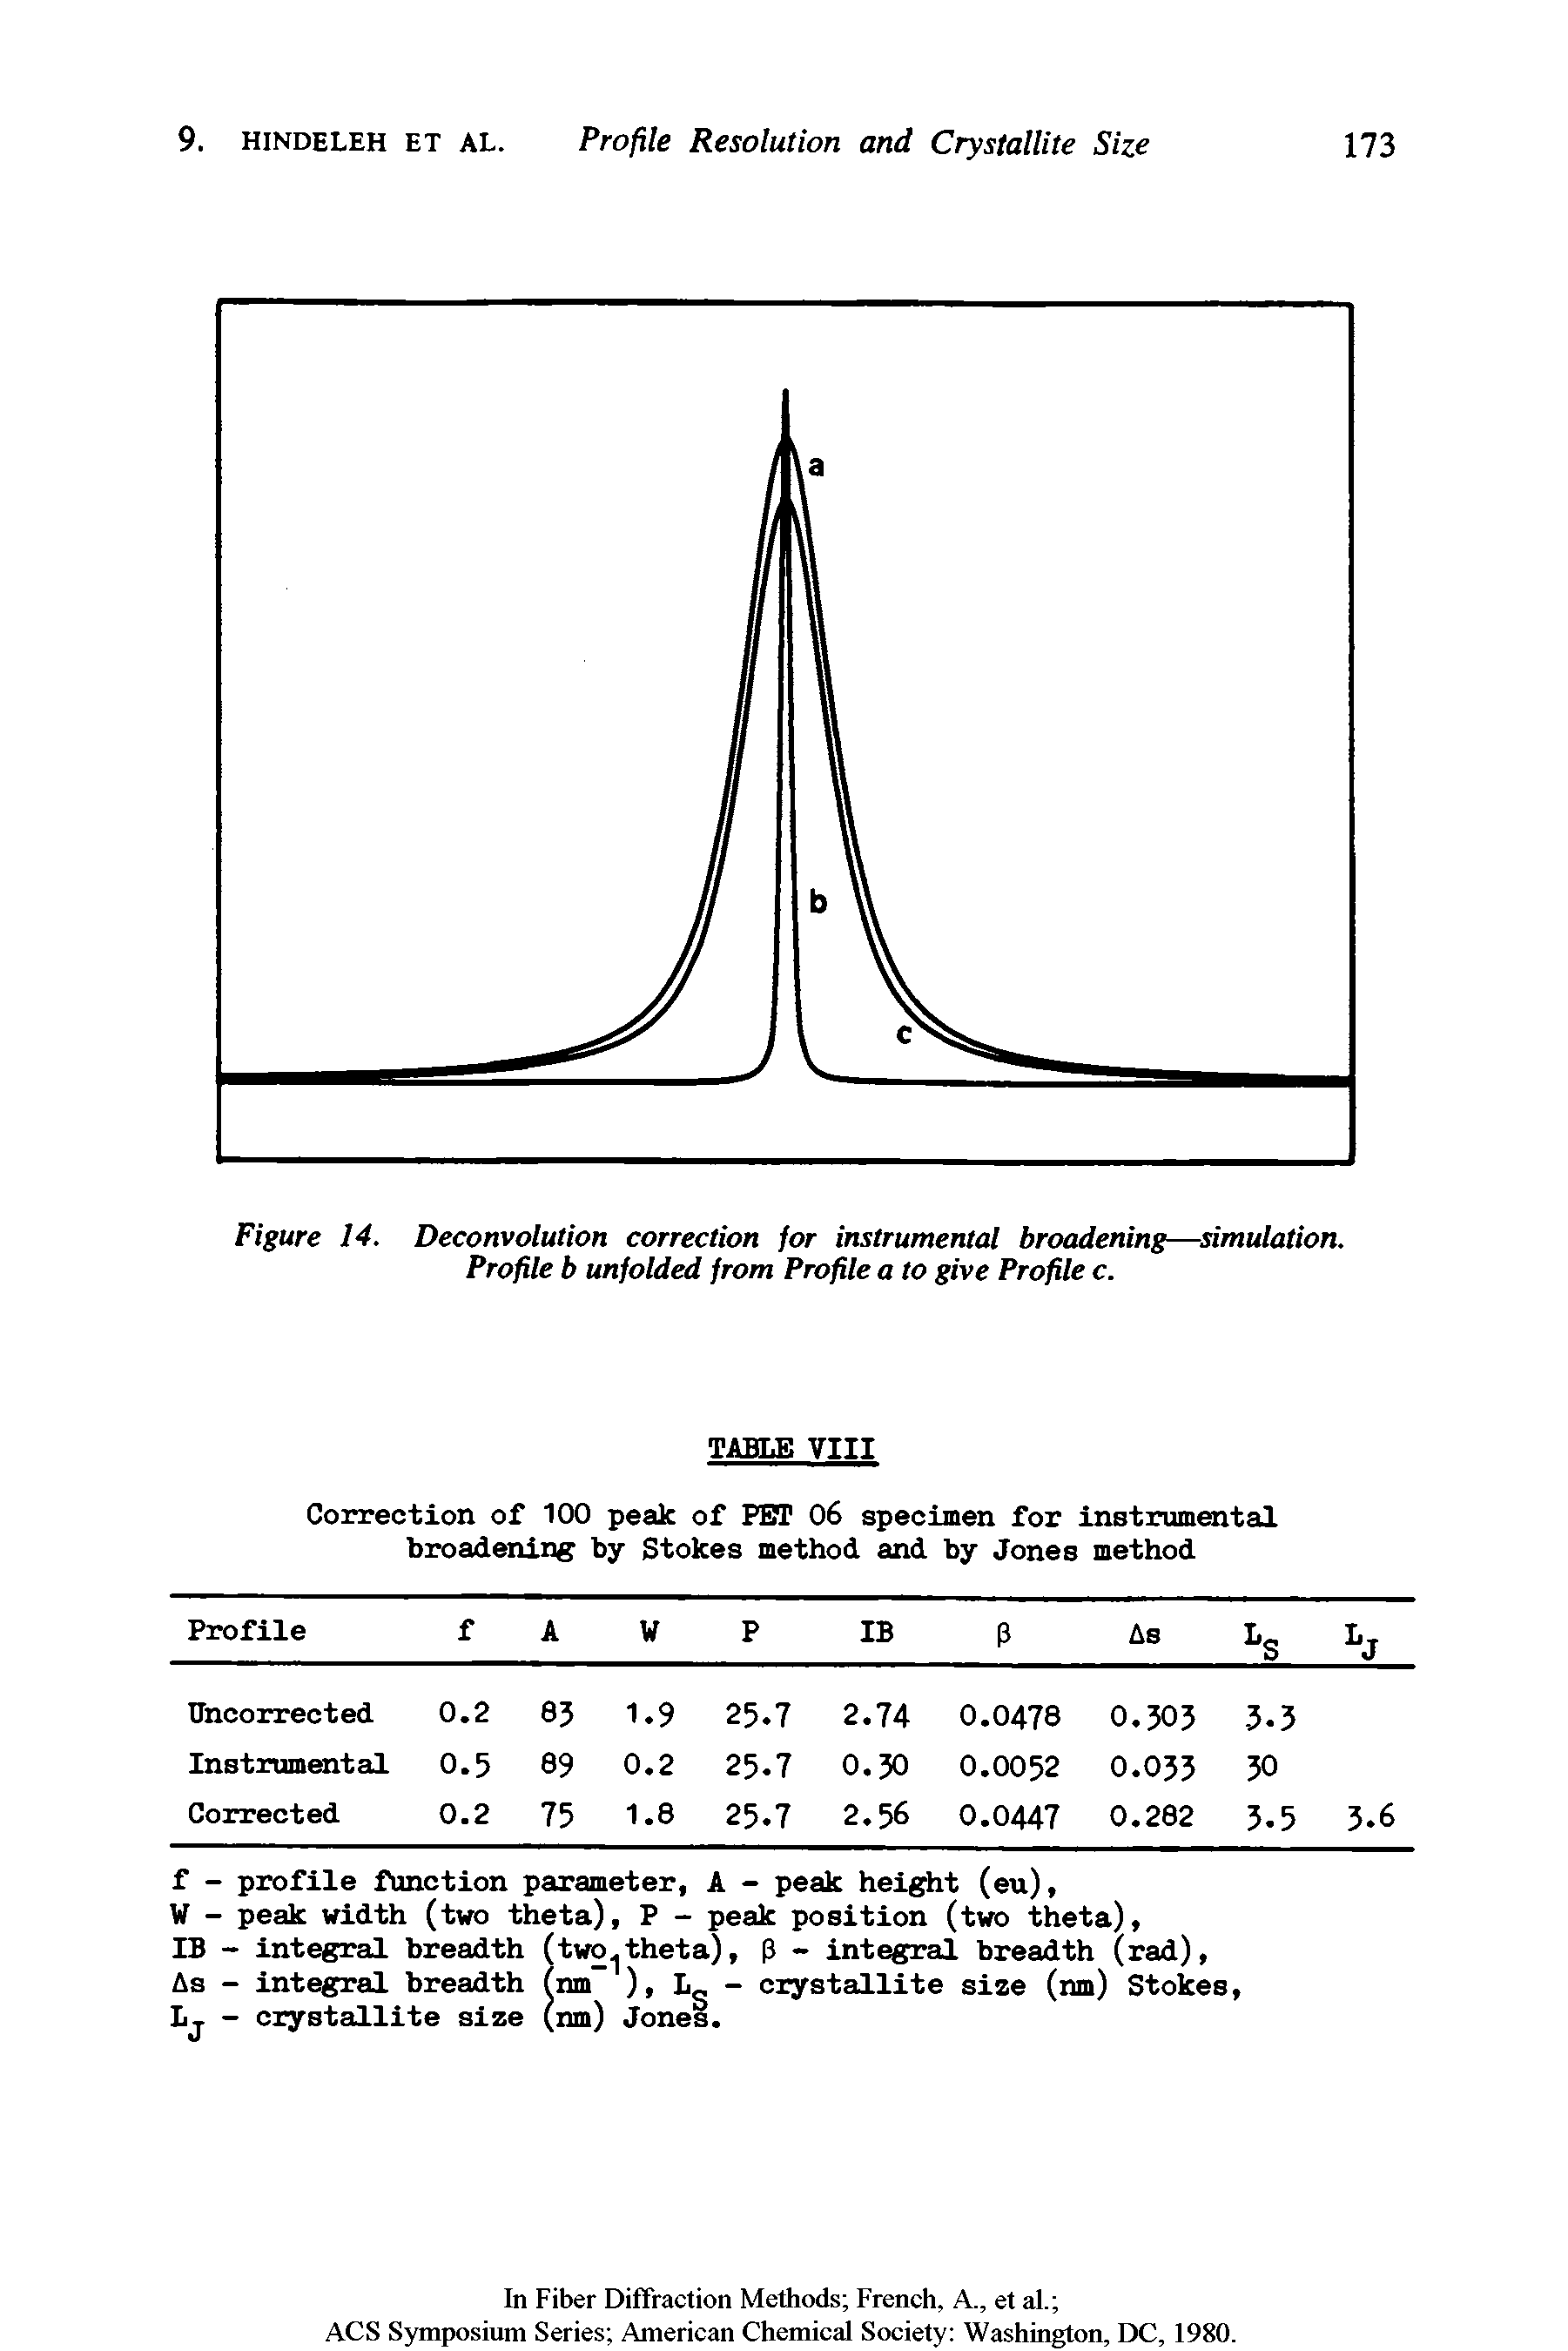 Figure 14. Deconvolution correction for instrumental broadening—simulation. Profile b unfolded from Profile a to give Profile c.